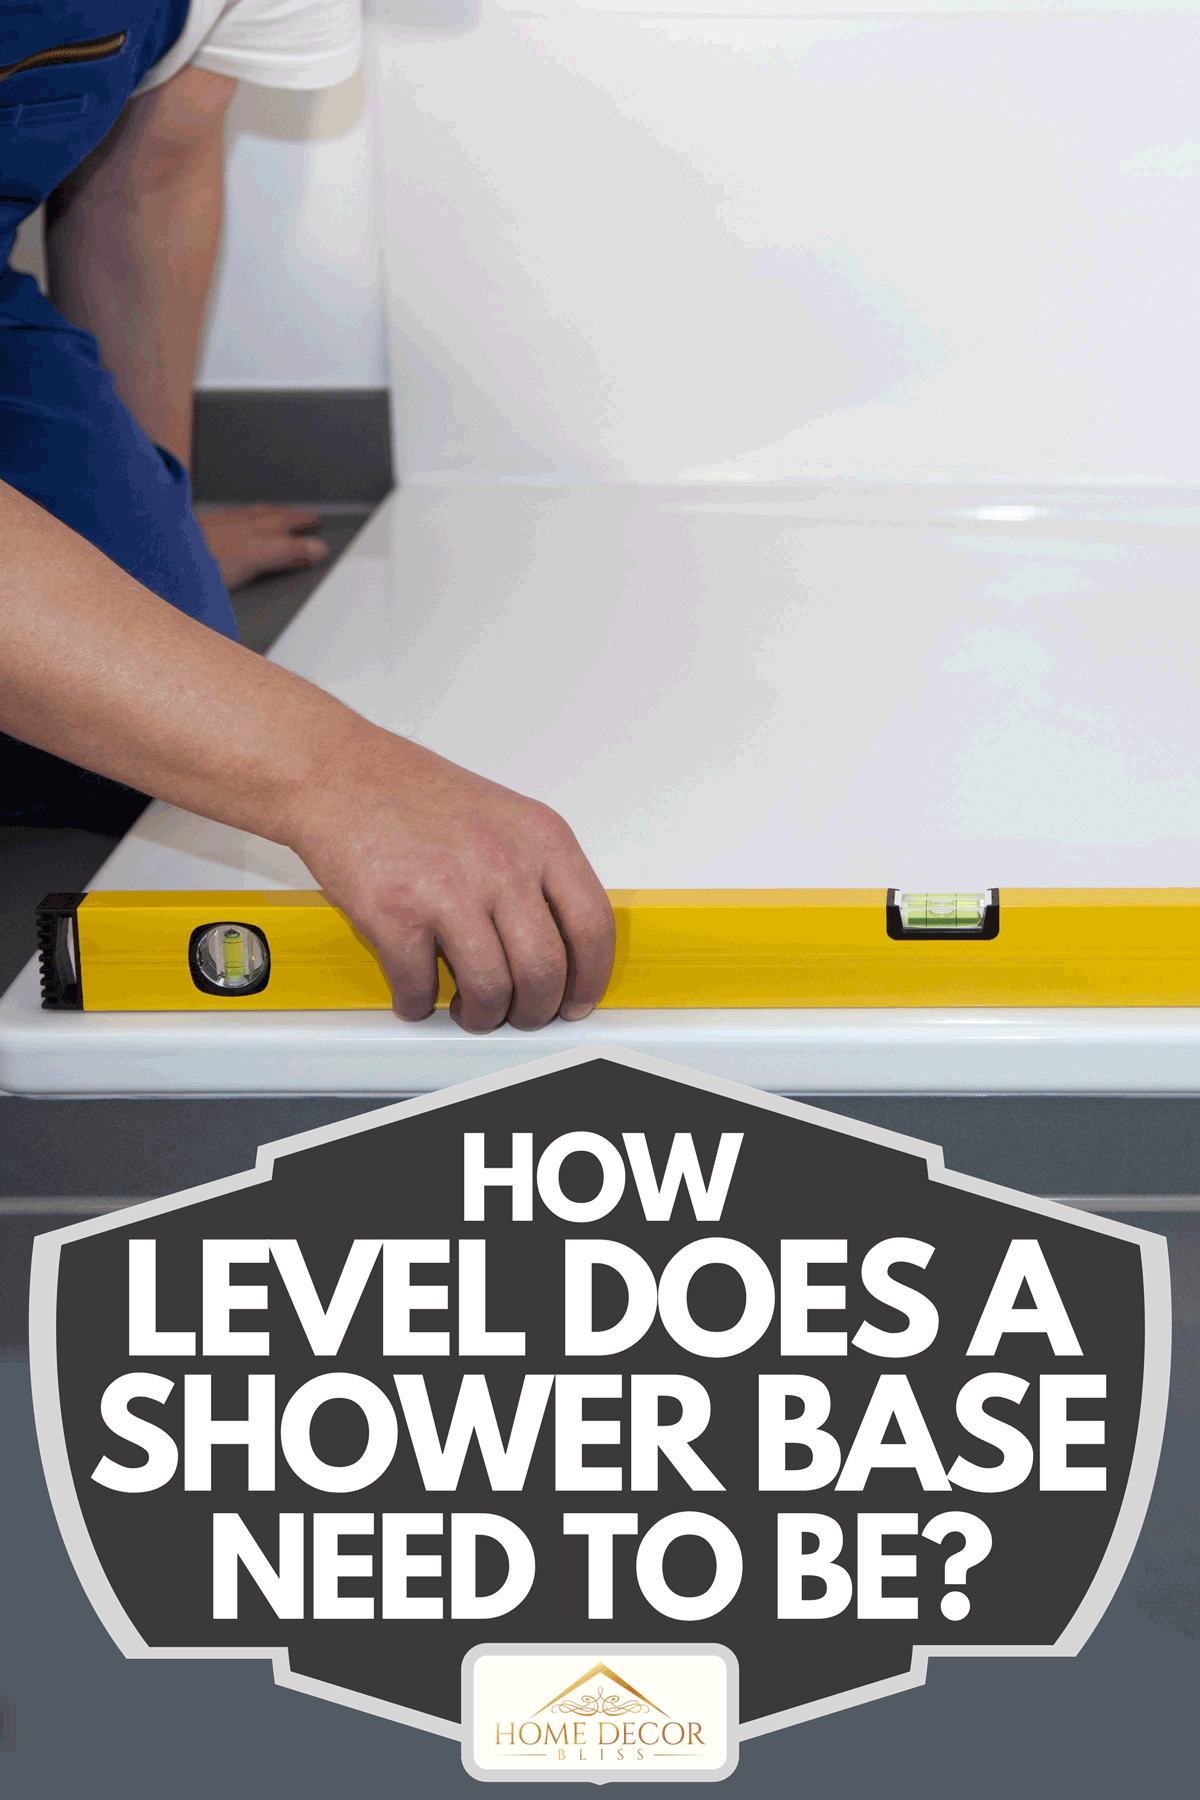 A worker using level bar on shower base, How Level Does A Shower Base Need To Be?